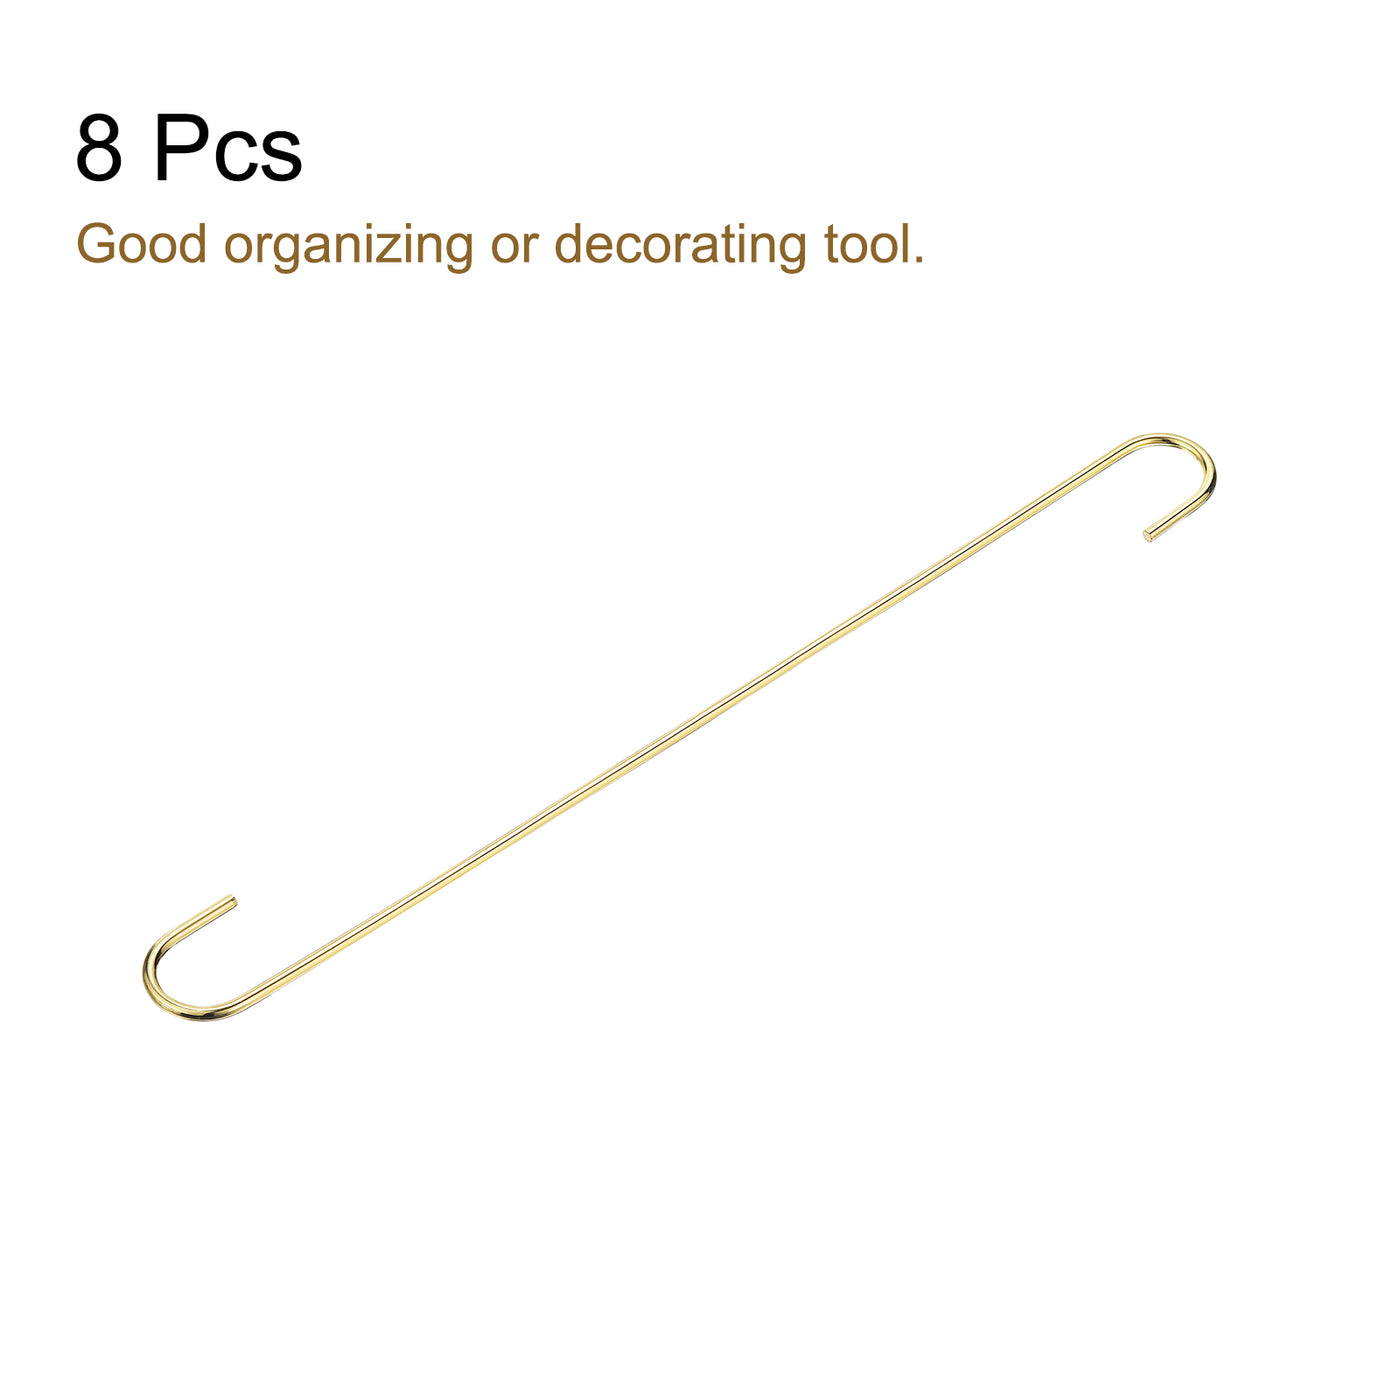 uxcell Uxcell S Hanging Hooks, 16inch(400mm) Extra Long Steel Hanger, Indoor Outdoor Uses for Garden, Bathroom, Closet, Workshop, Kitchen, Gold Tone, 8Pcs